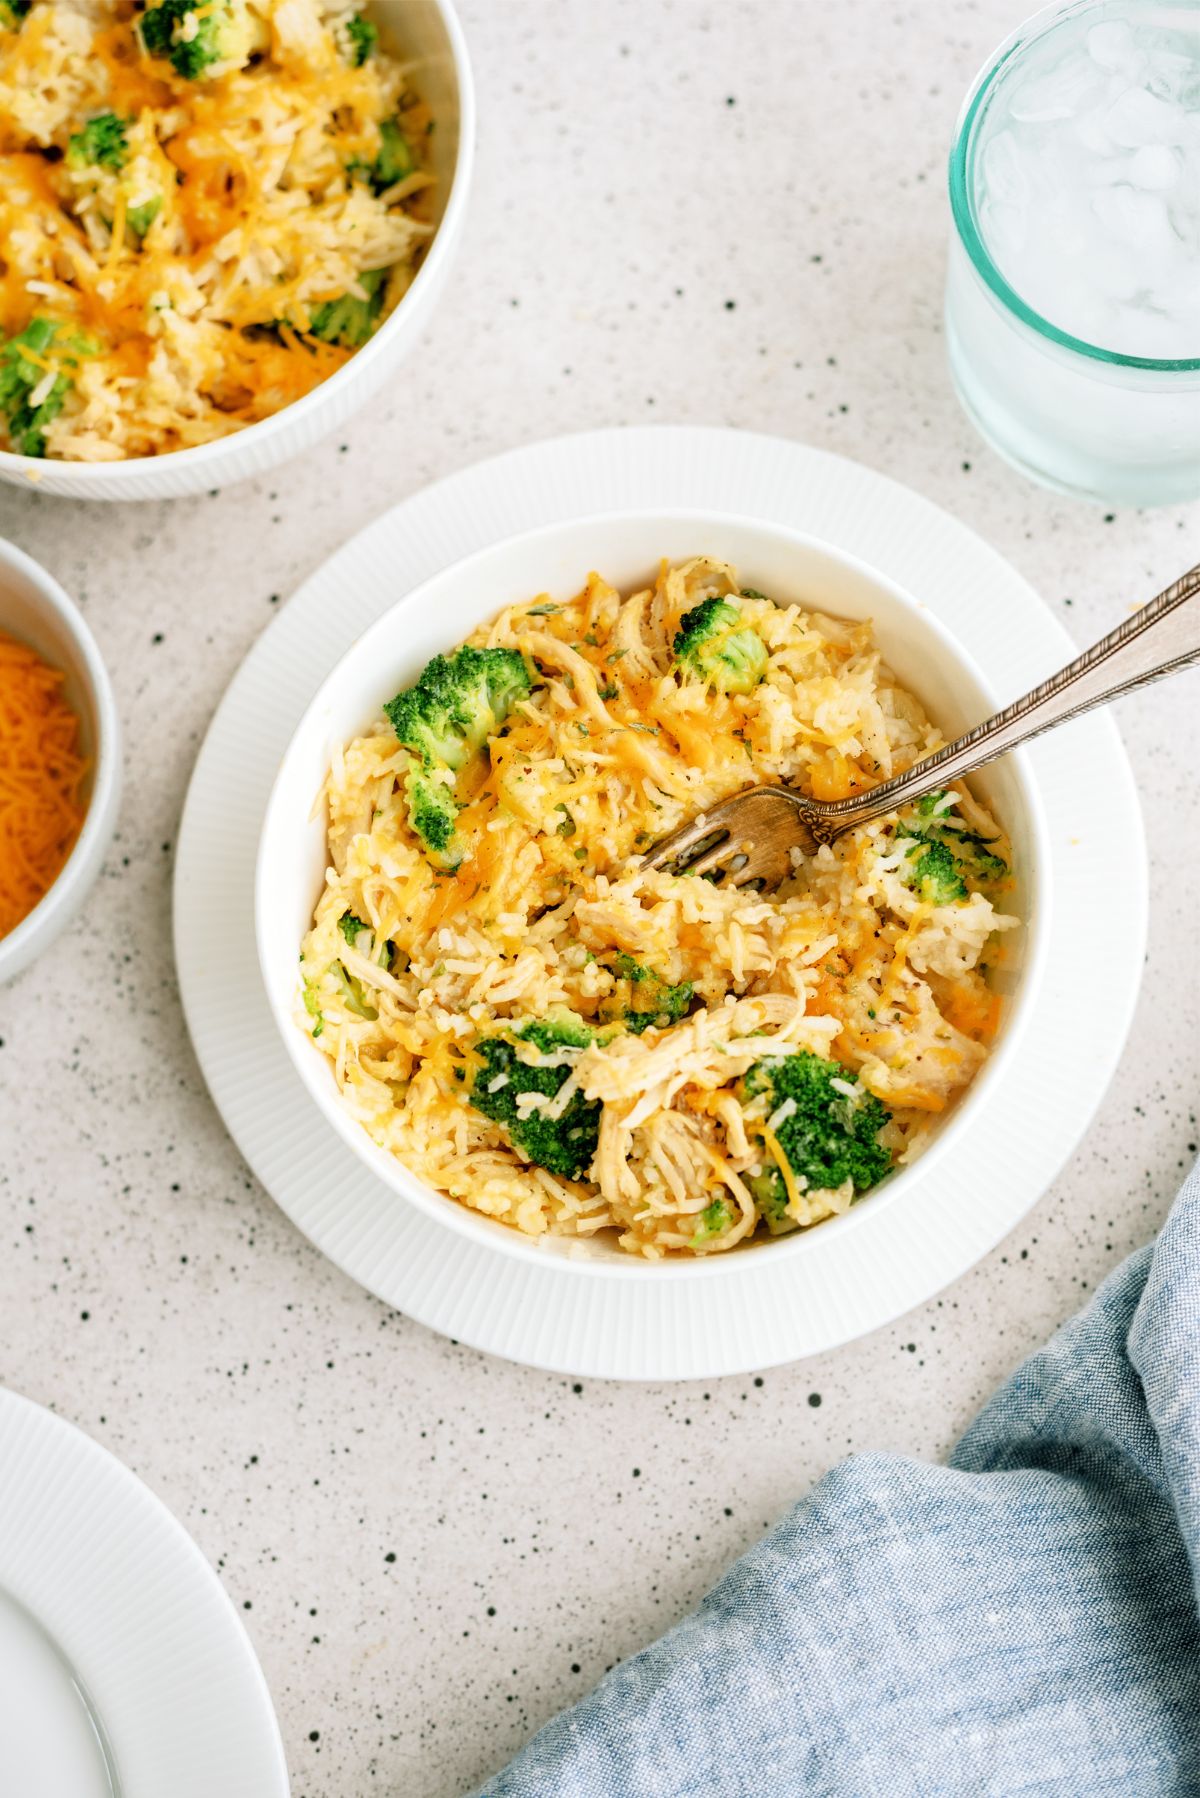 Top view of Instant Pot Cheesy Broccoli Chicken and Rice in a bowl